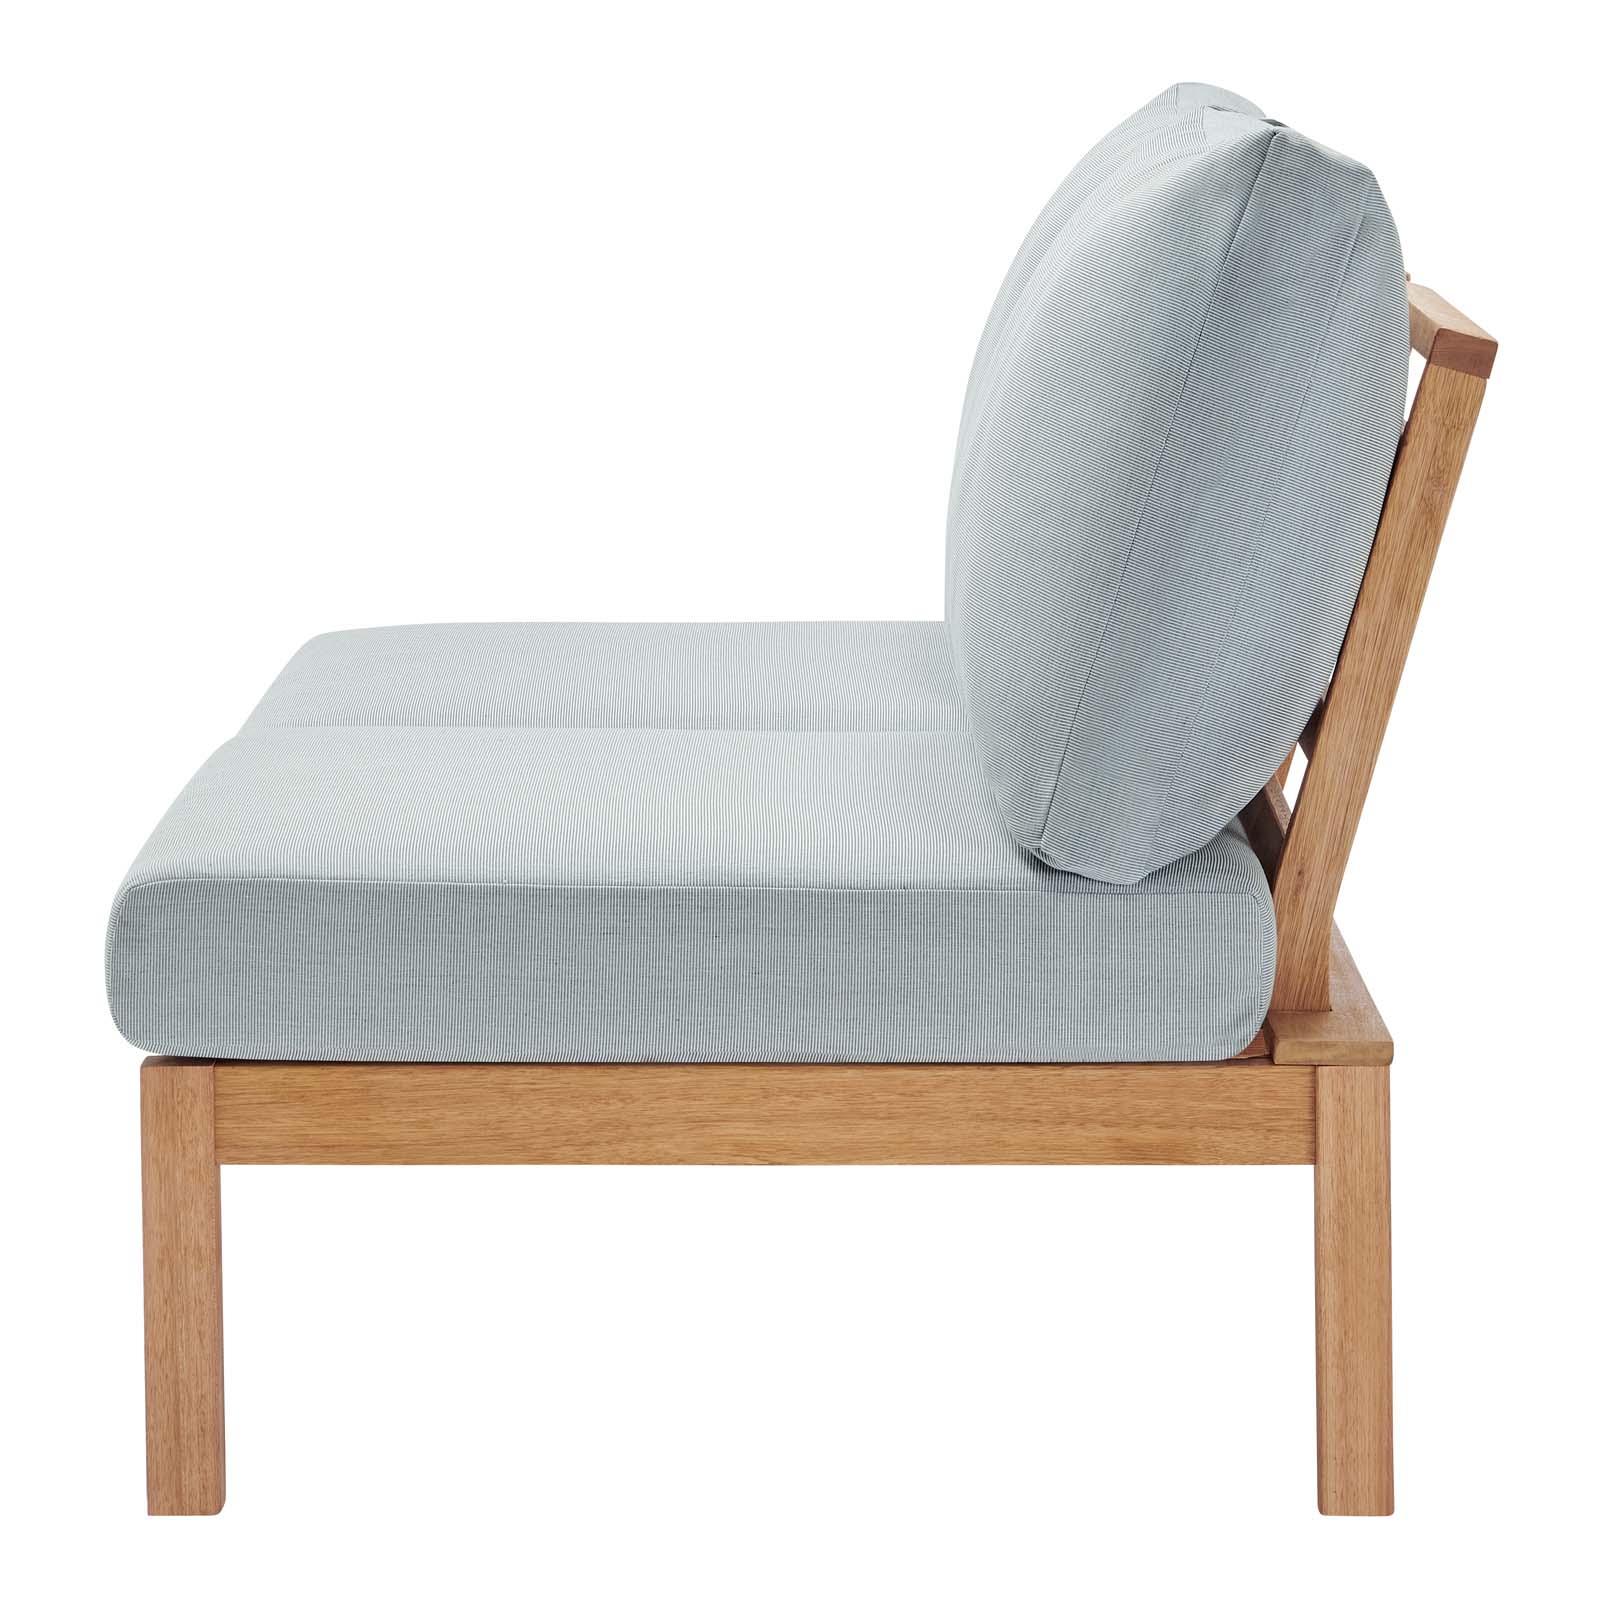 Modway Freeport Karri Wood Outdoor Patio Loveseat with Left-Facing Side End Table in Natural Light Blue - image 5 of 5